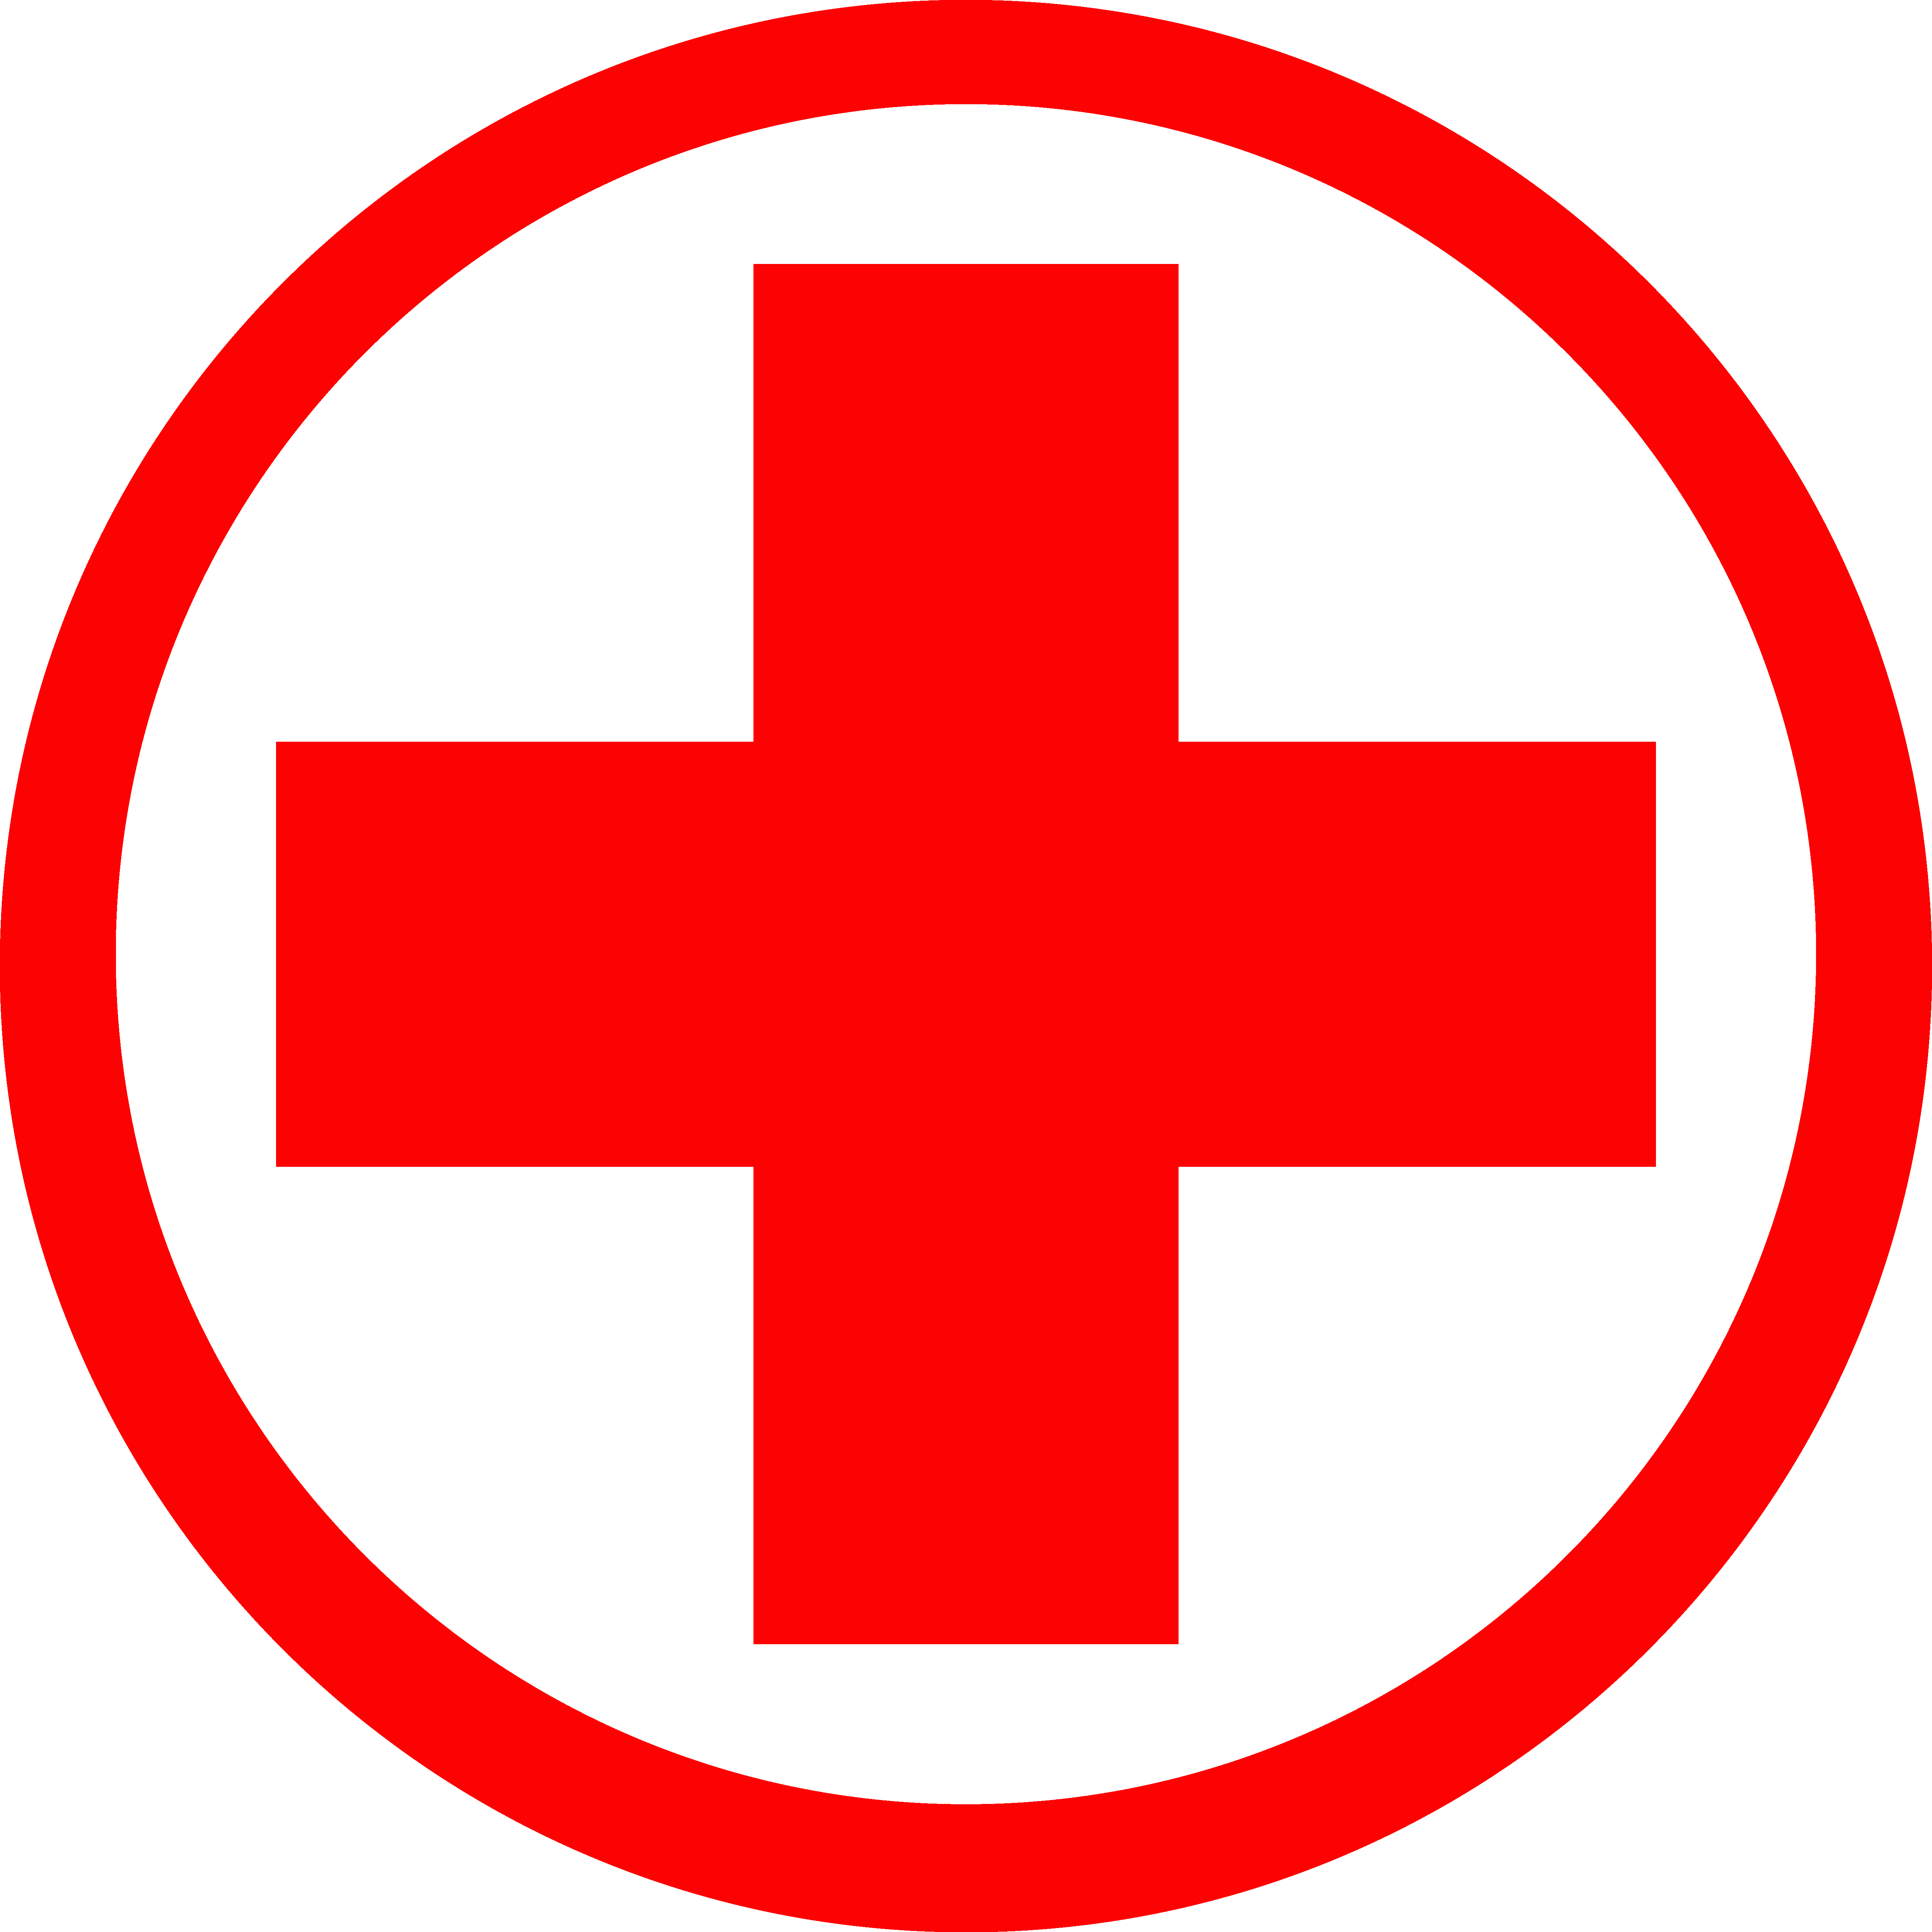 Red Plus Logo - Red medical cross clip art library - RR collections